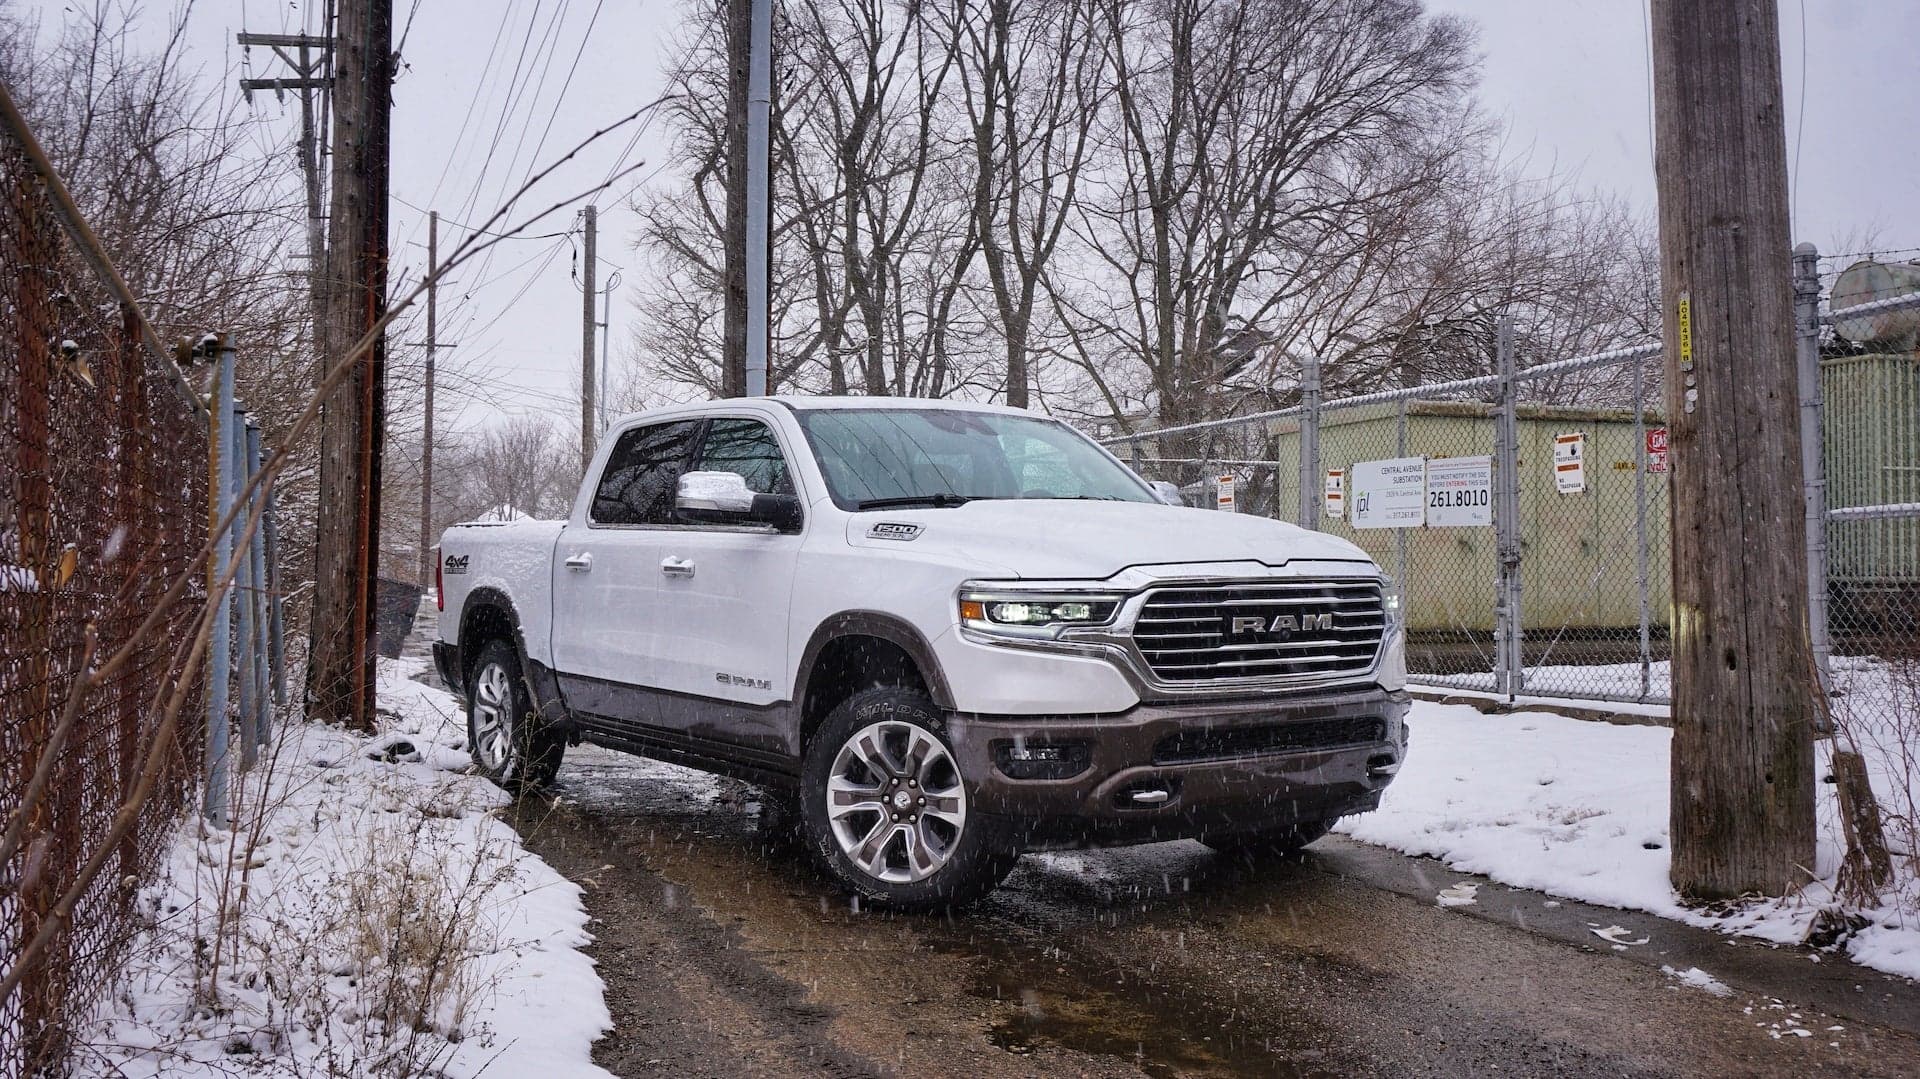 2019 Ram 1500 Laramie Longhorn Review: The Pickup Truck El Chapo Would Drive (If He Wasn’t in Prison)